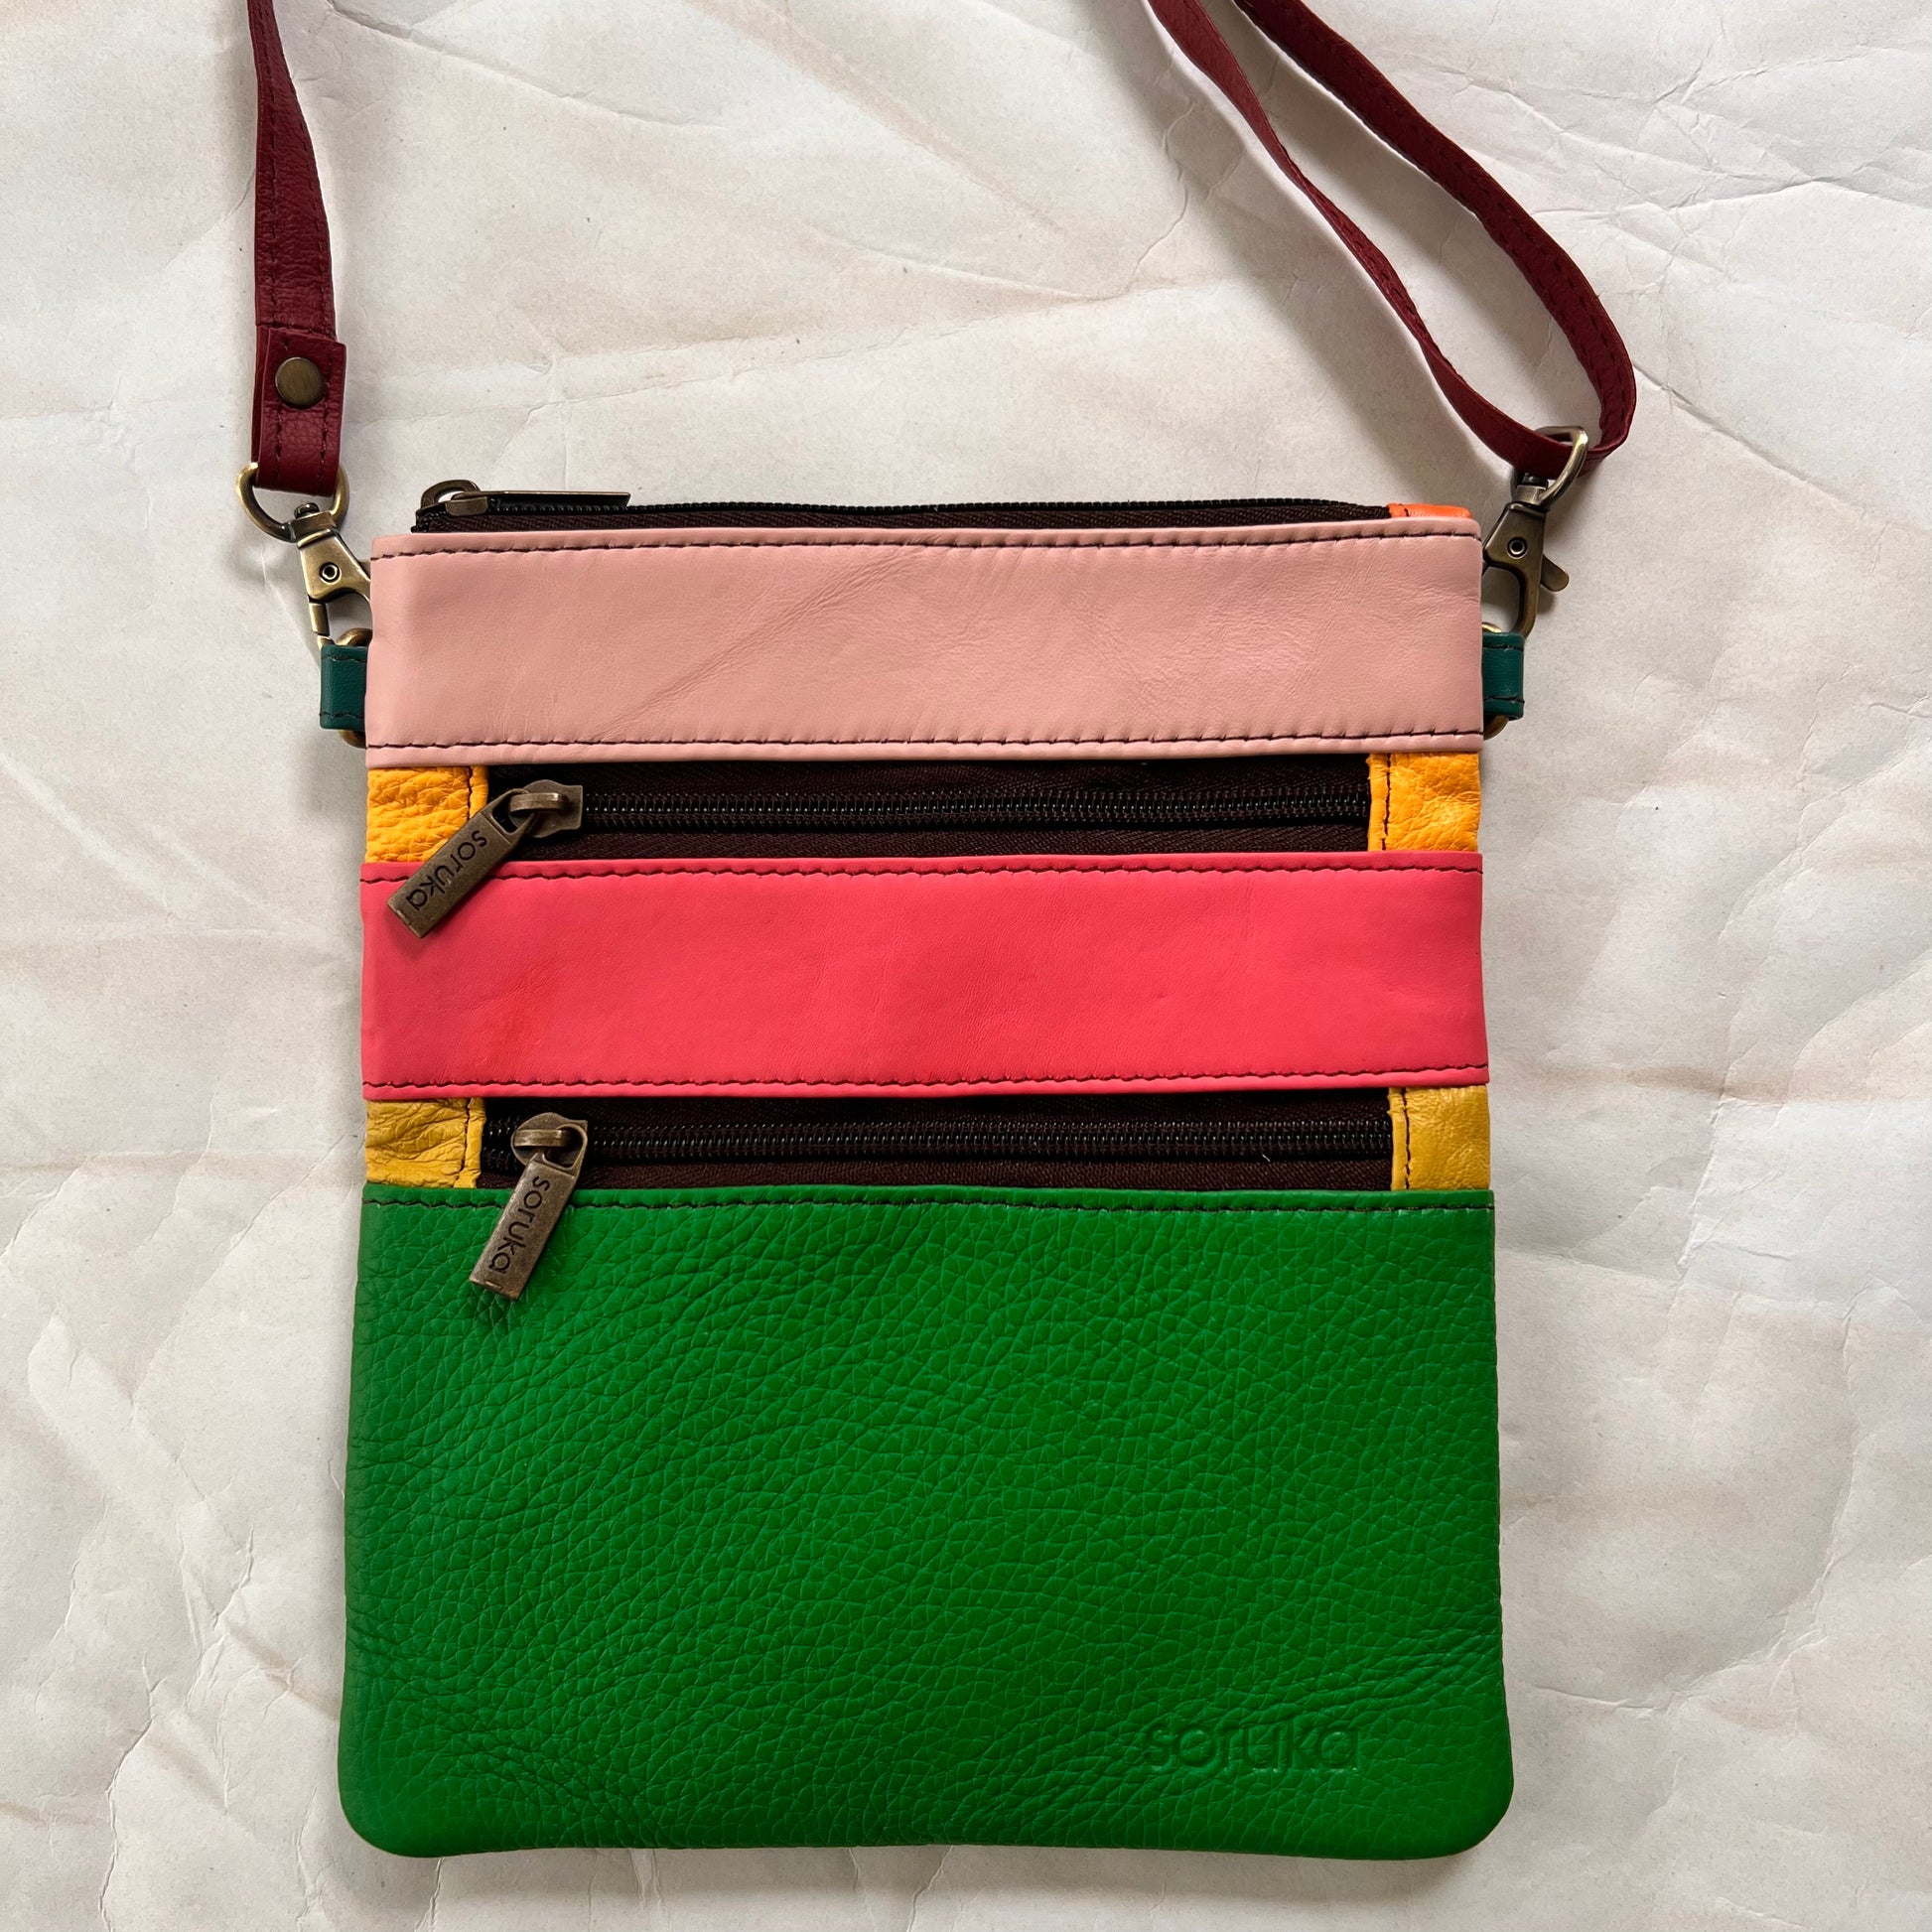 maya bag with crossbody strap attached.